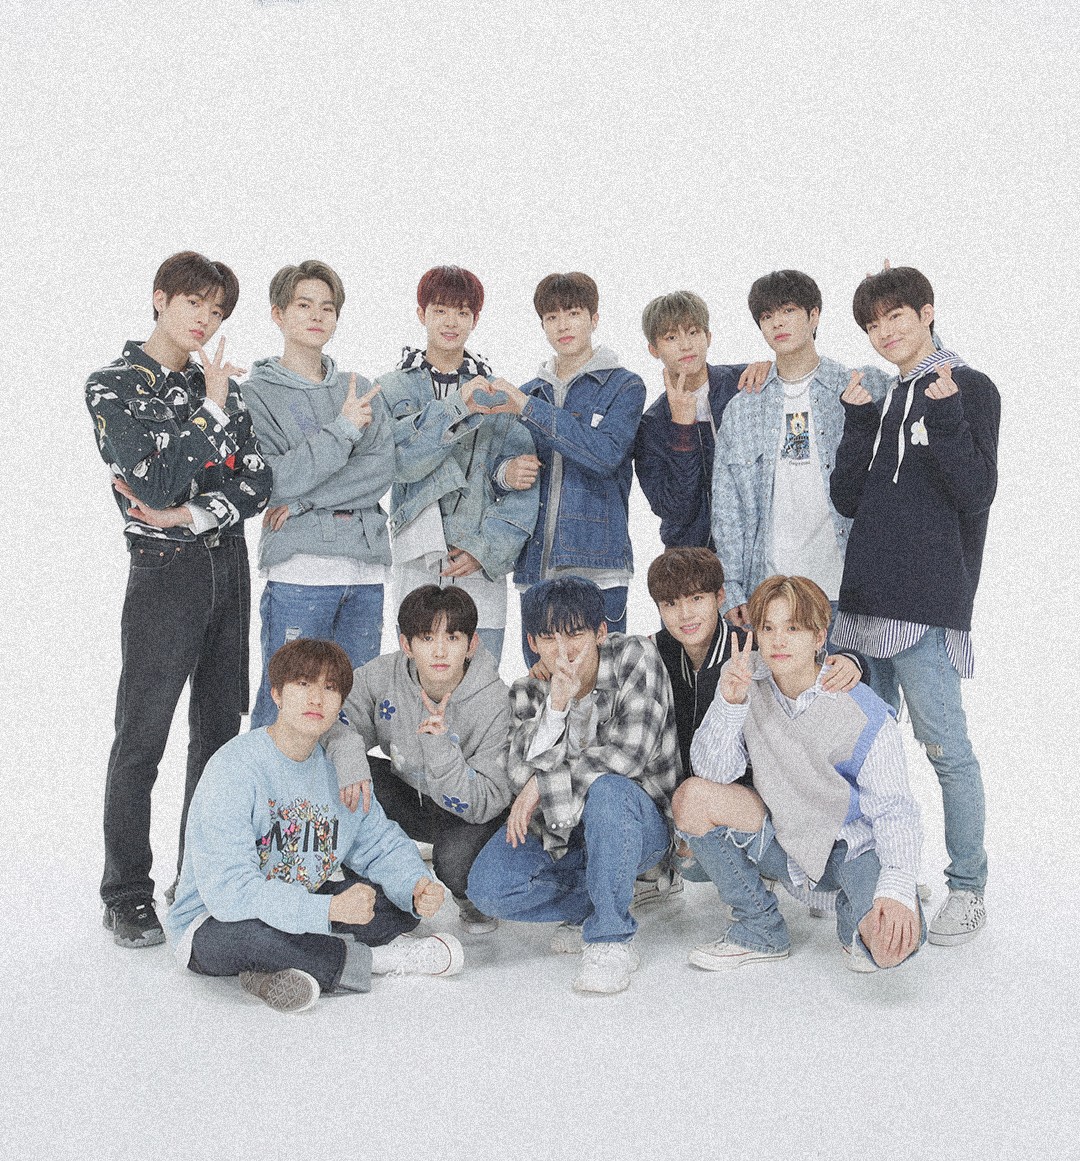 Treasure was formed through a survival show called YG TREASURE BOX or YGTB with 28 trainees in total.All 28 trainees are talented tbh.